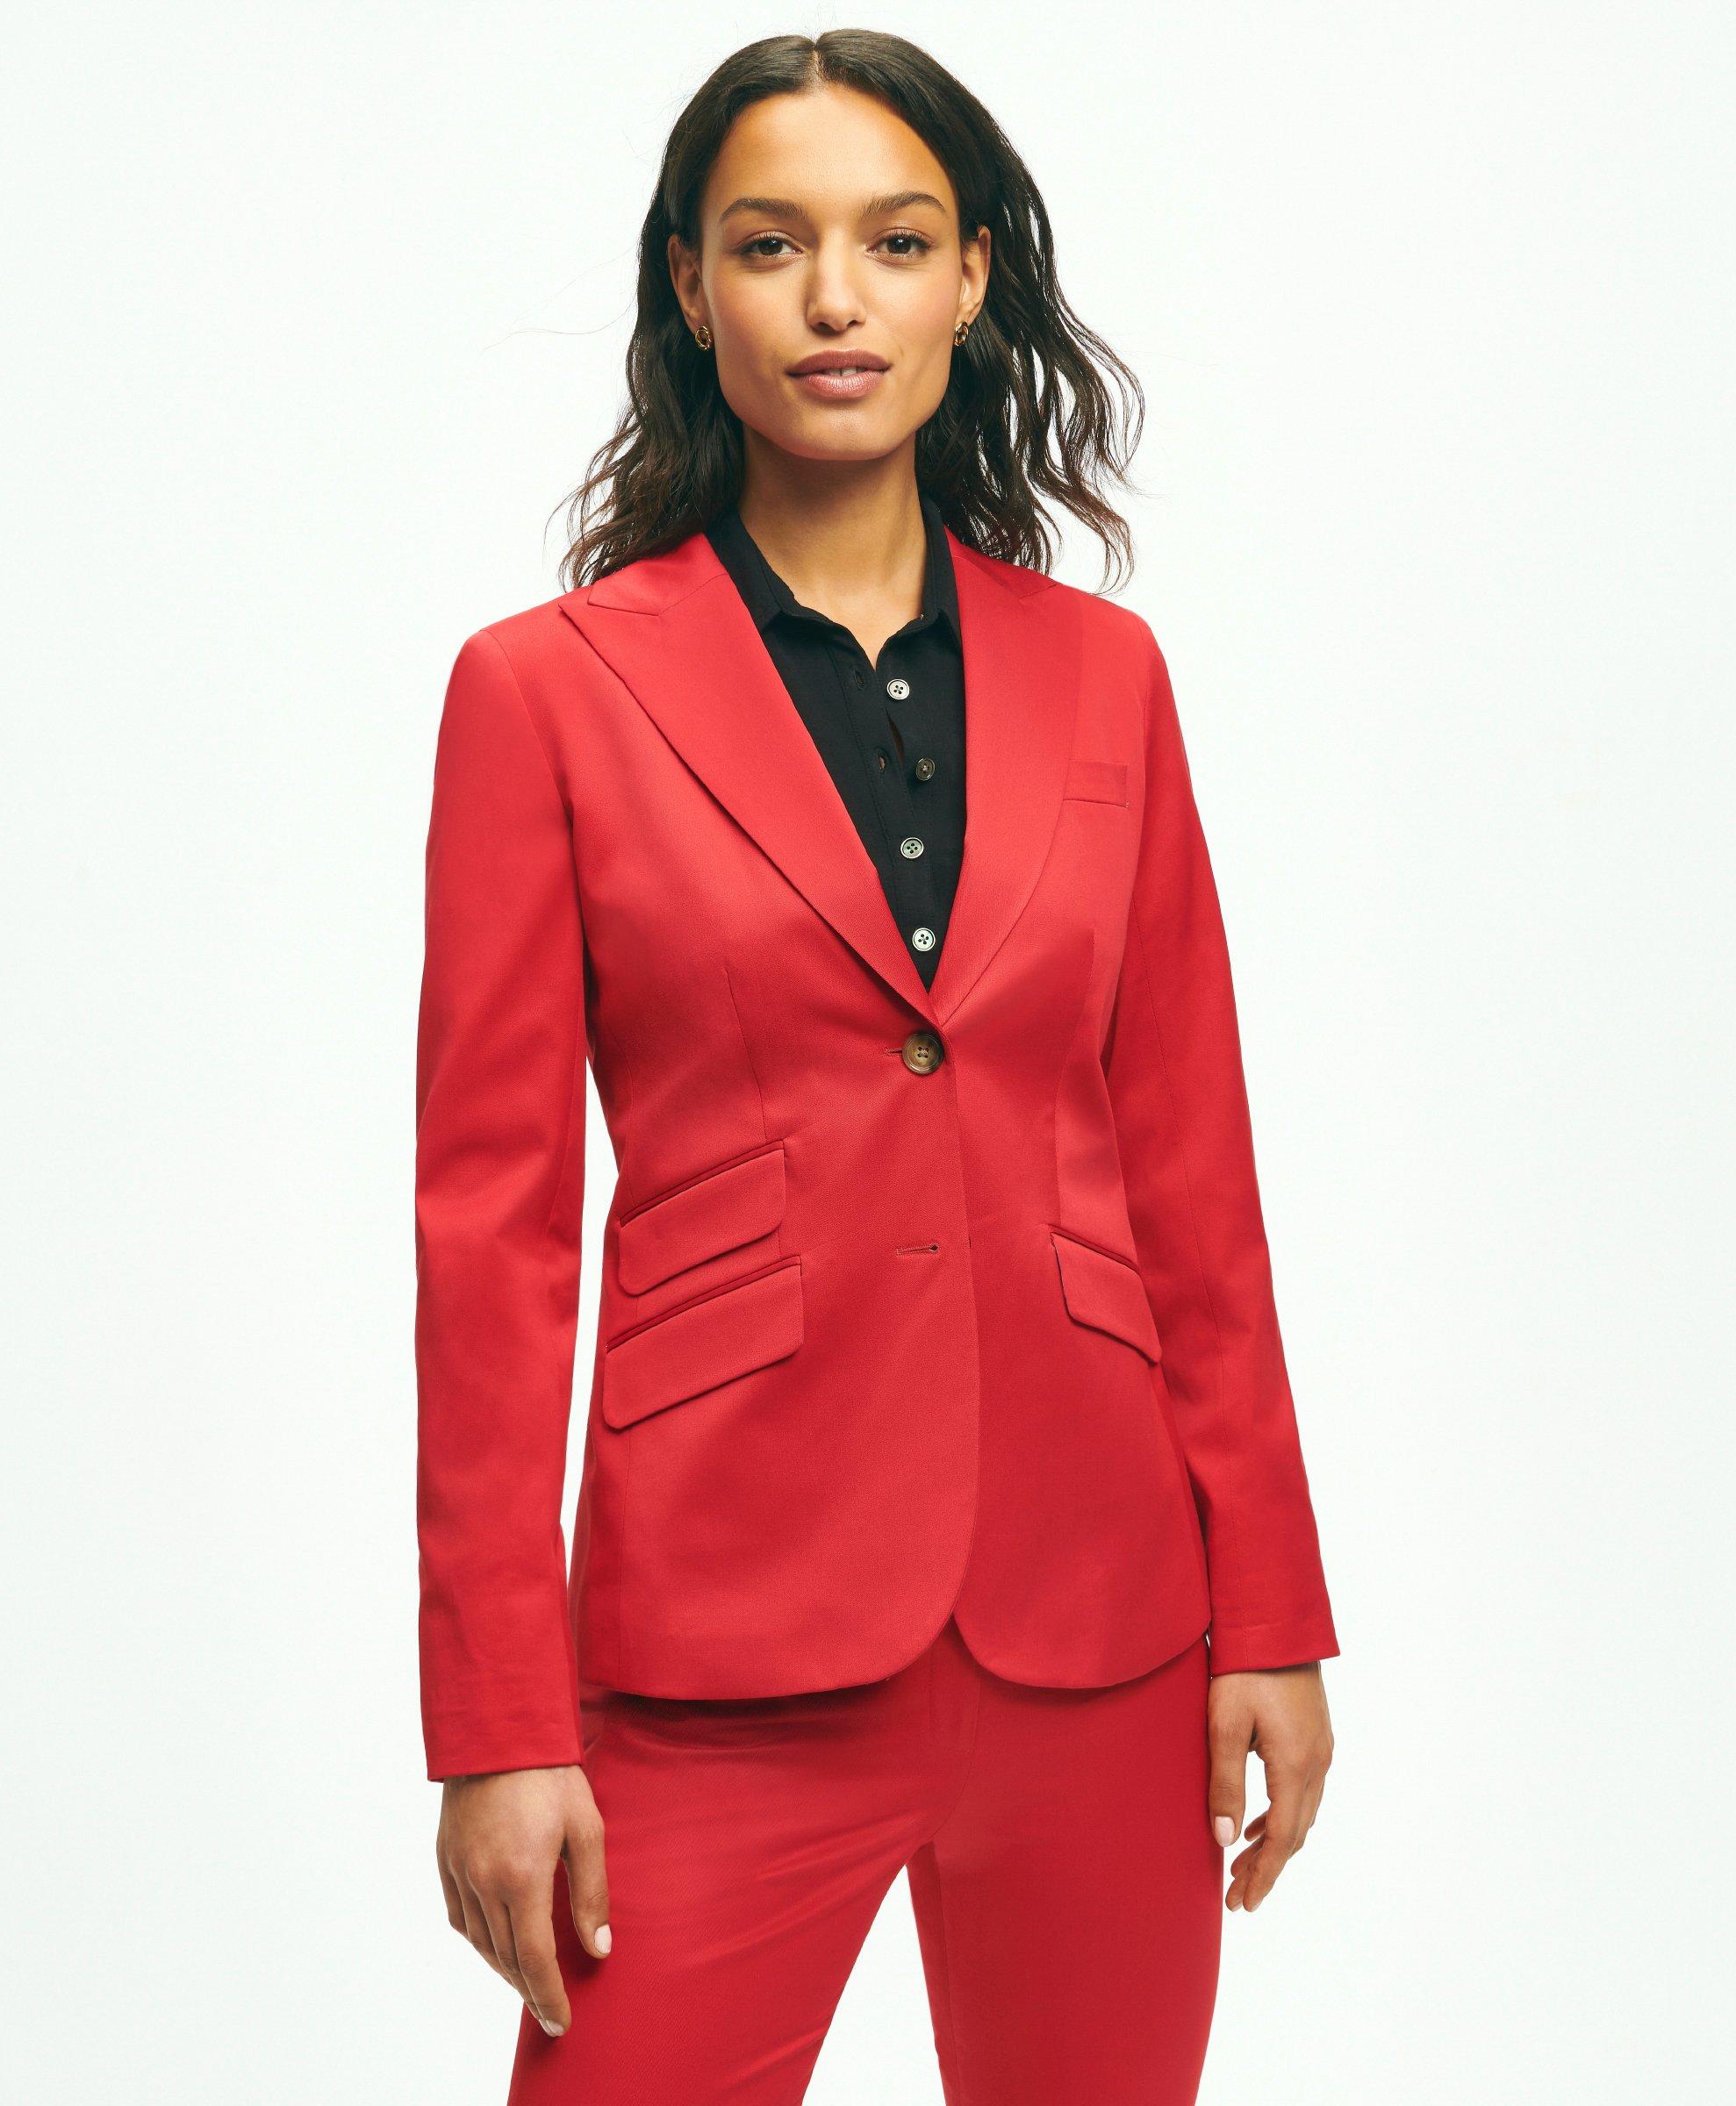 Shop Brooks Brothers Peak Lapel Cotton Sateen Jacket | Bright Red | Size 6